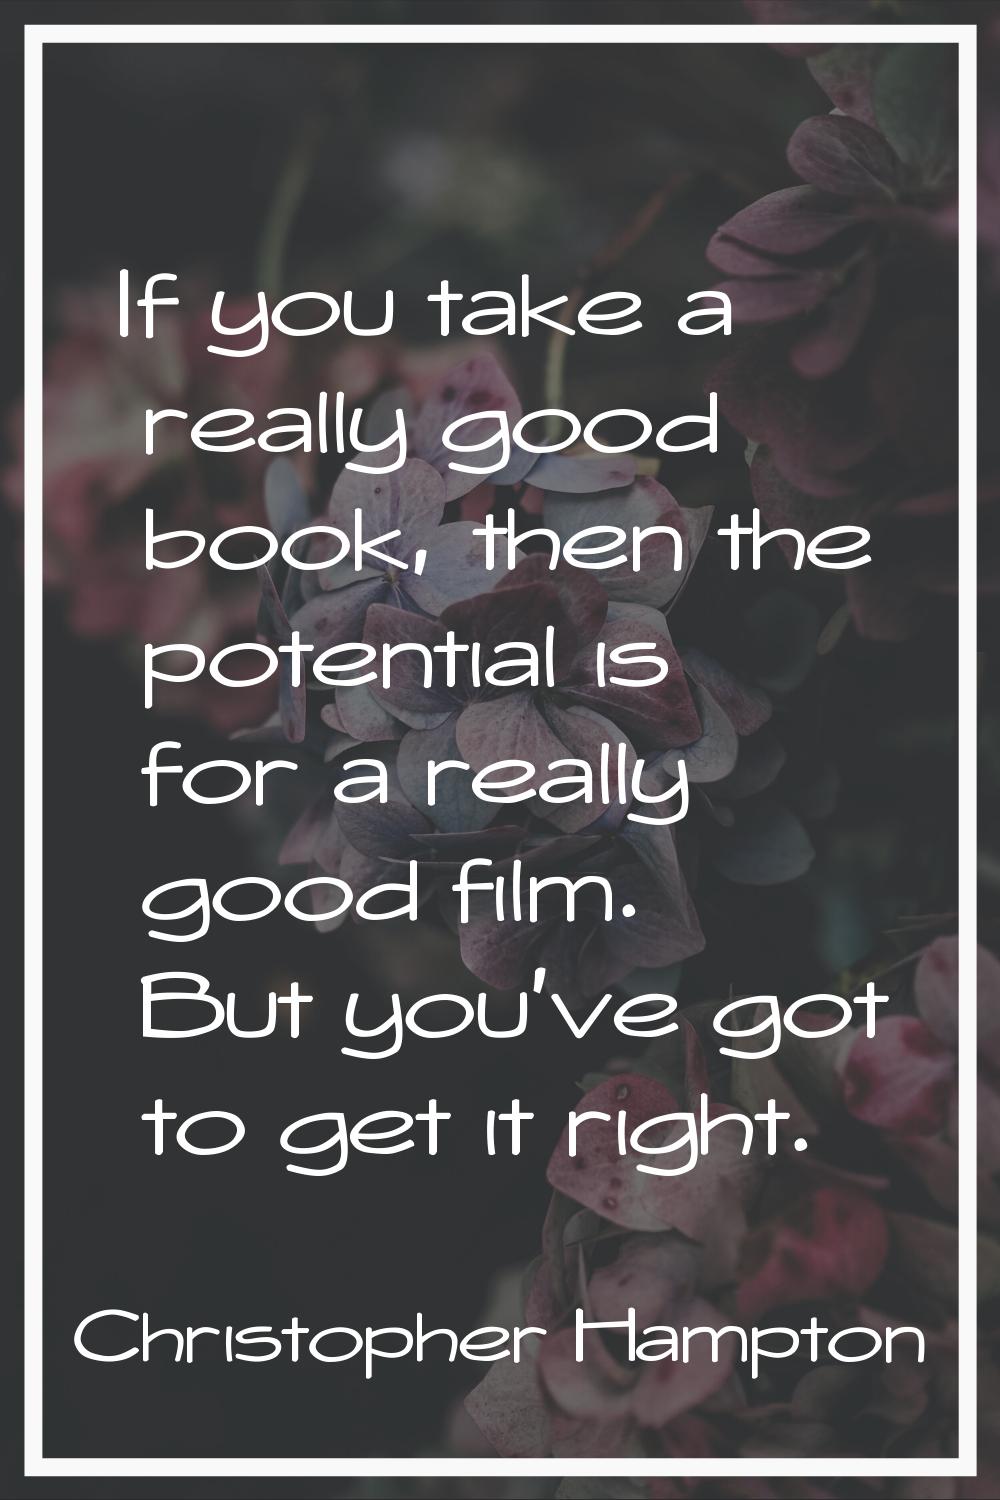 If you take a really good book, then the potential is for a really good film. But you've got to get